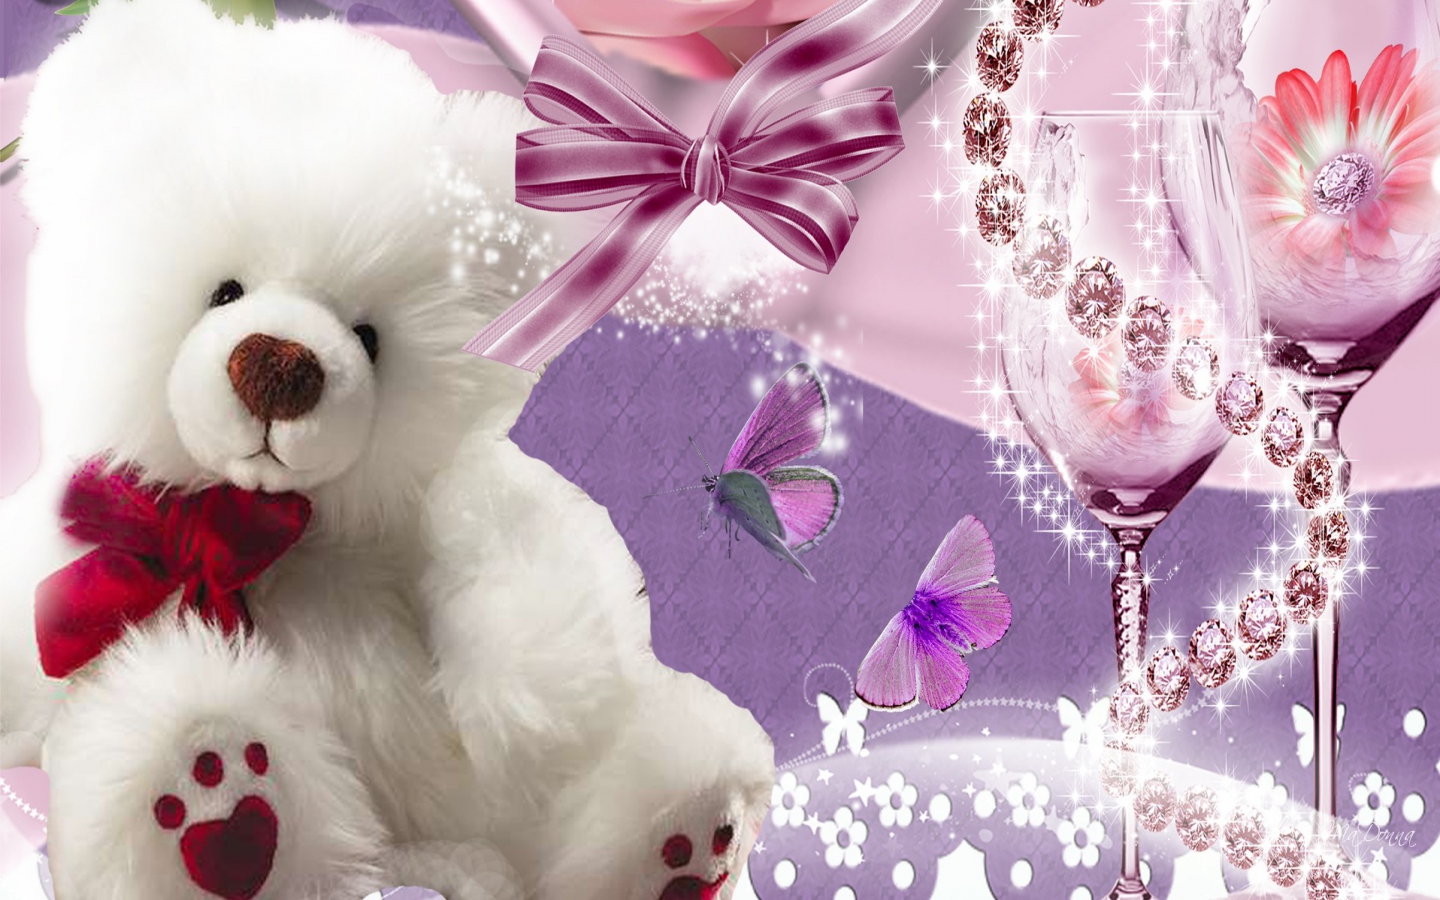 Teddy Bear Background Wallpapers - Whatsapp Dp Profile Picture Download -  1440x900 Wallpaper 